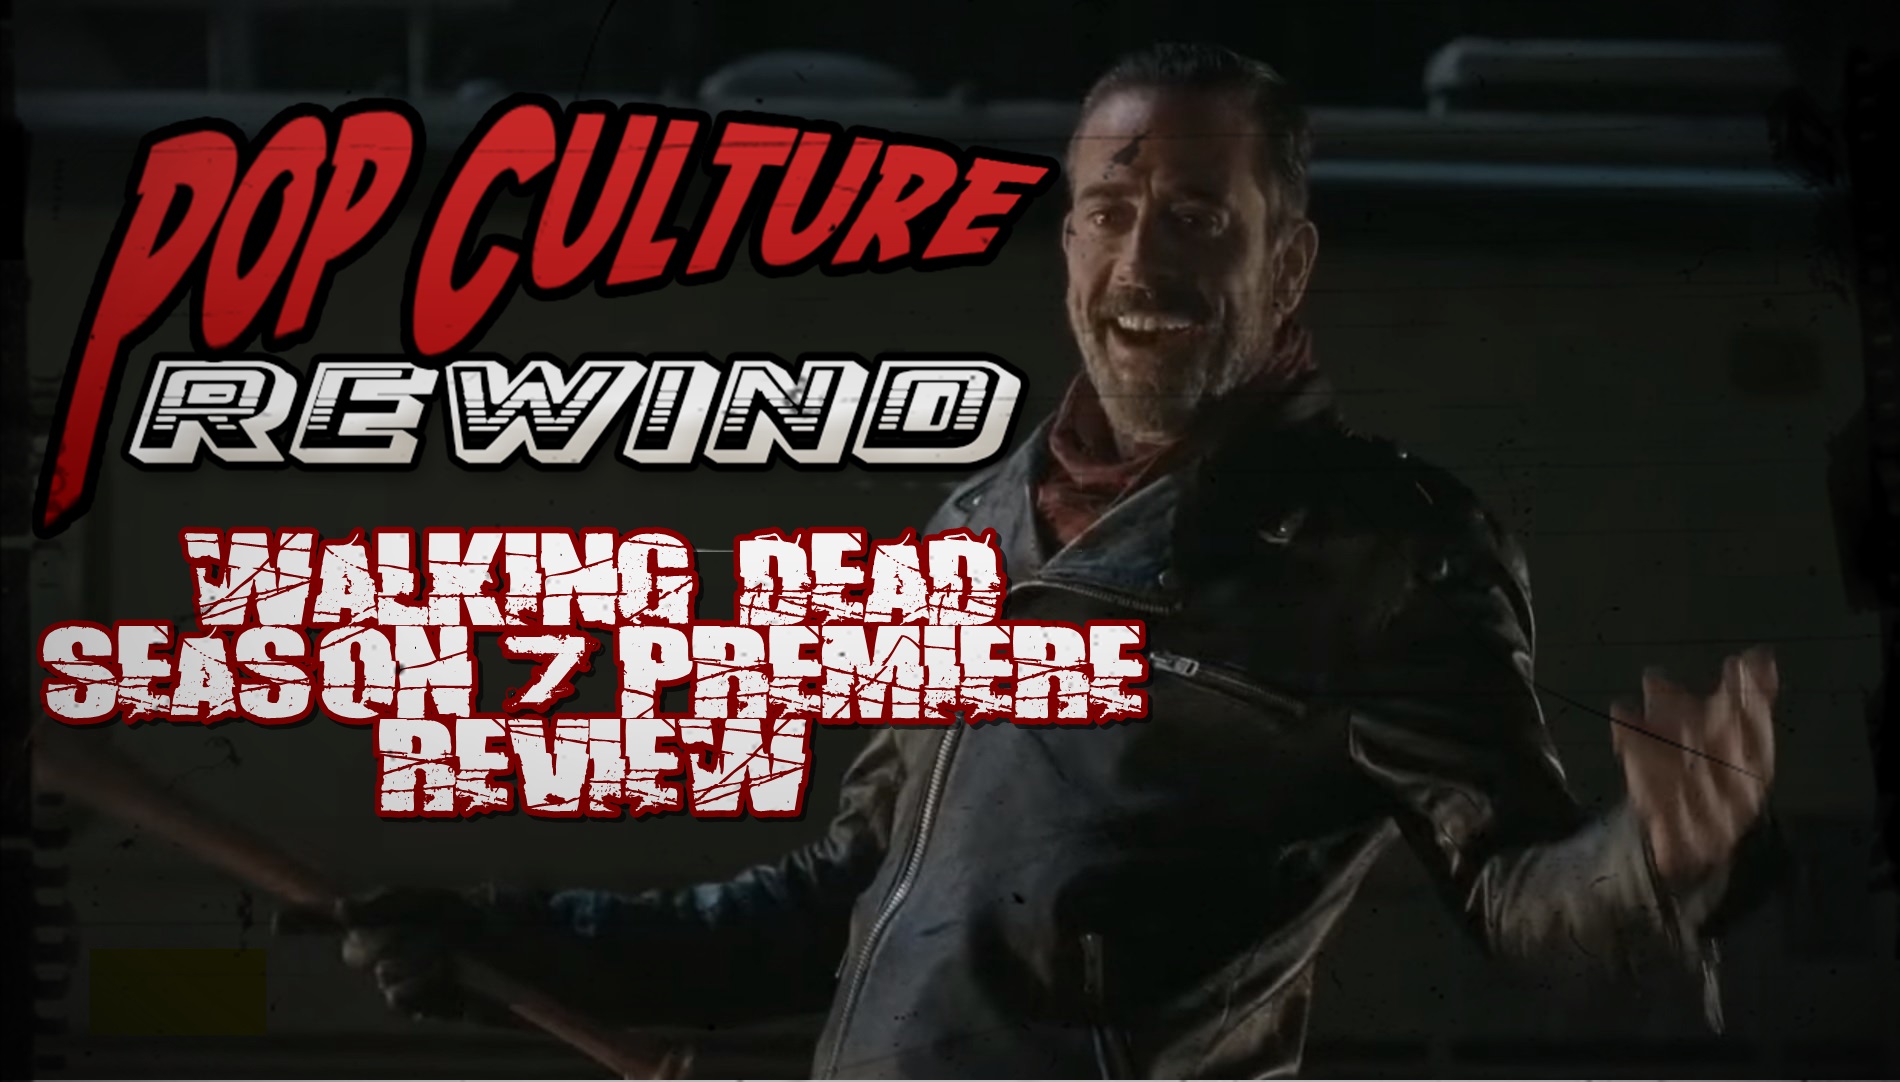 Walking Dead Season 7 Premiere Review - Who's Up For Some Popeye's??